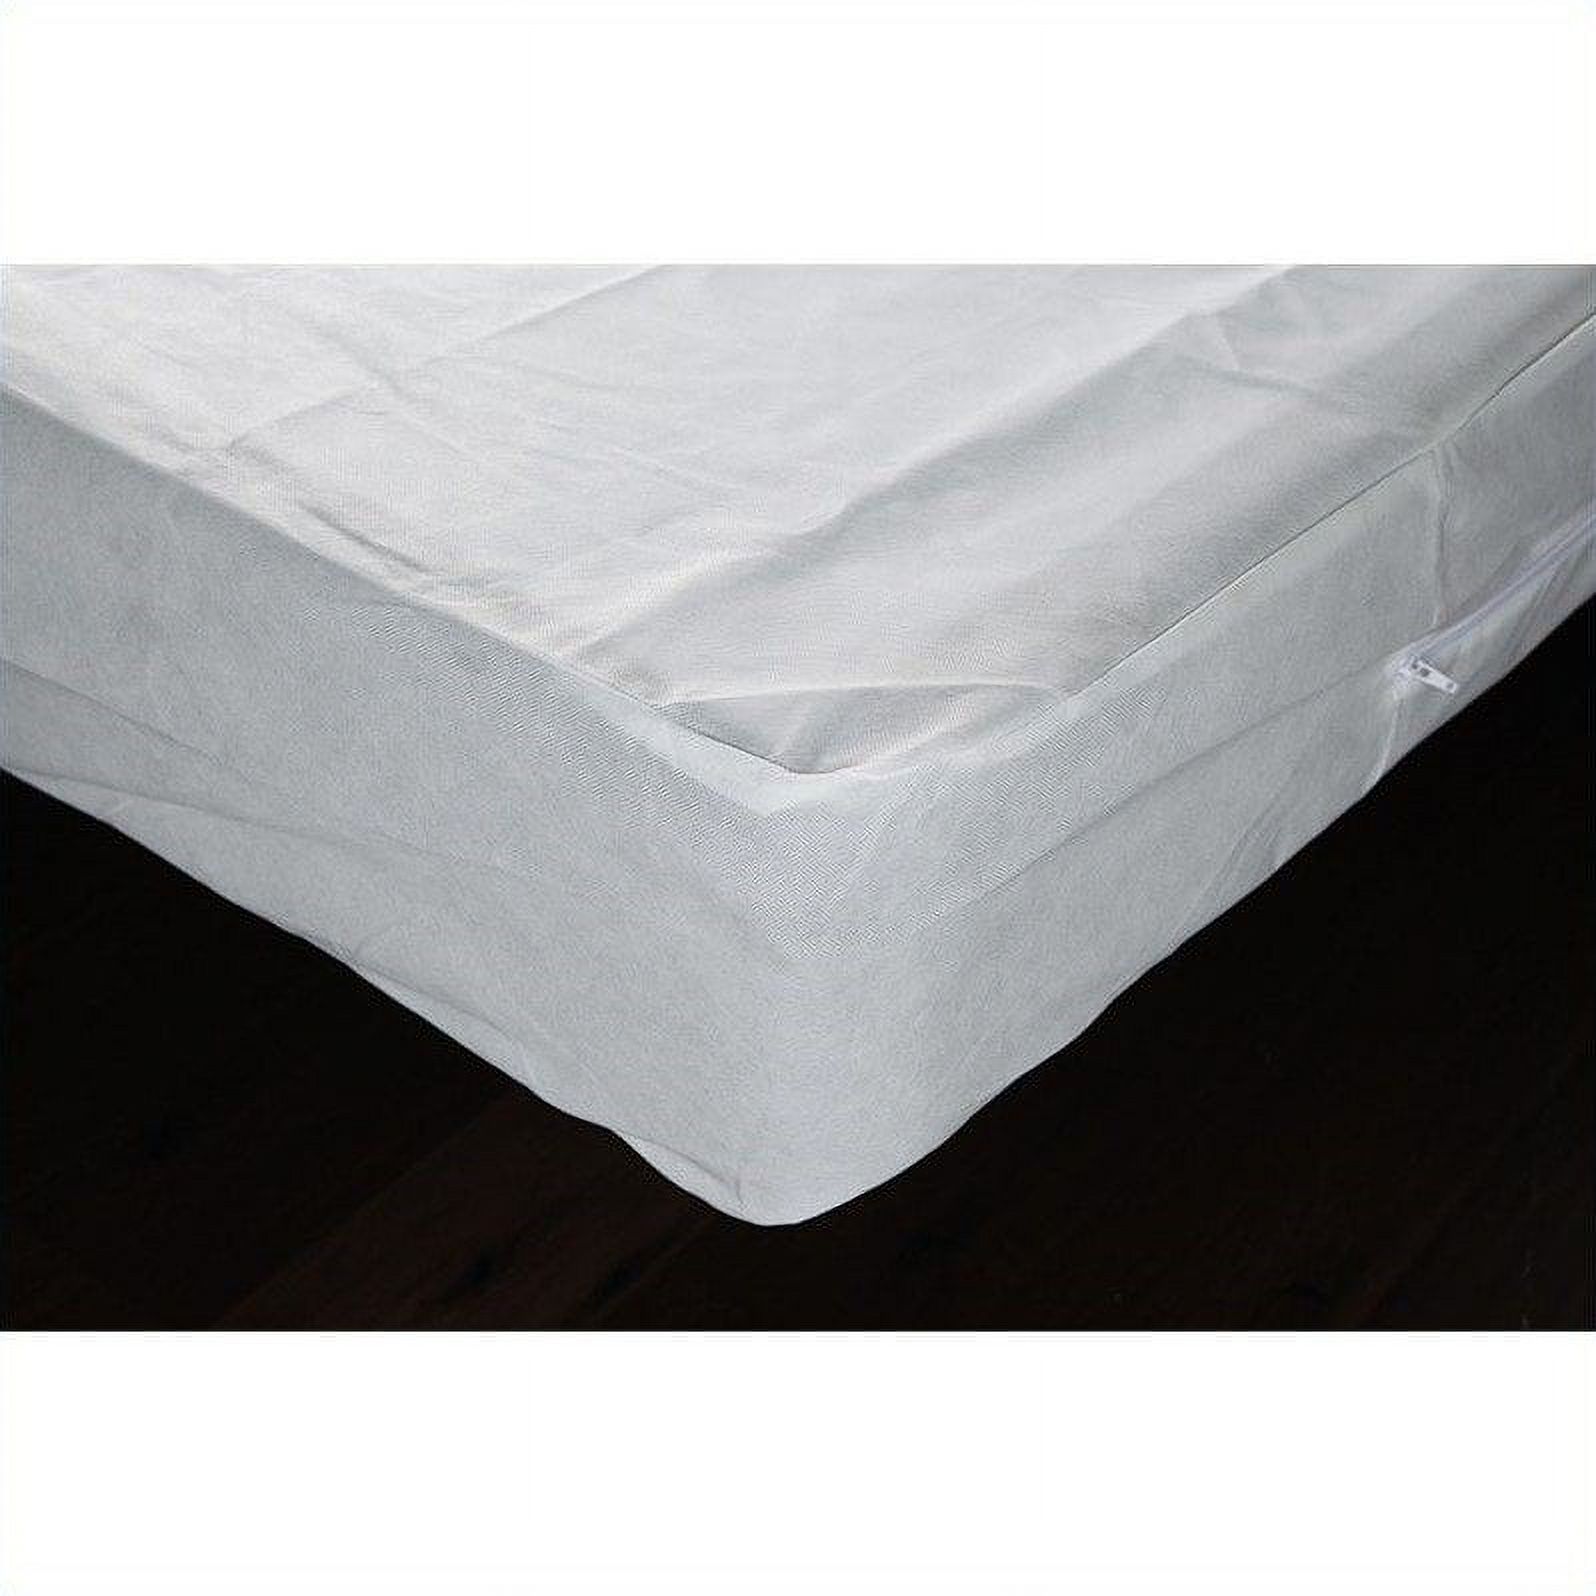 Box Spring Wrapper (Twin - 75 in. L x 39 in. H) - image 2 of 3